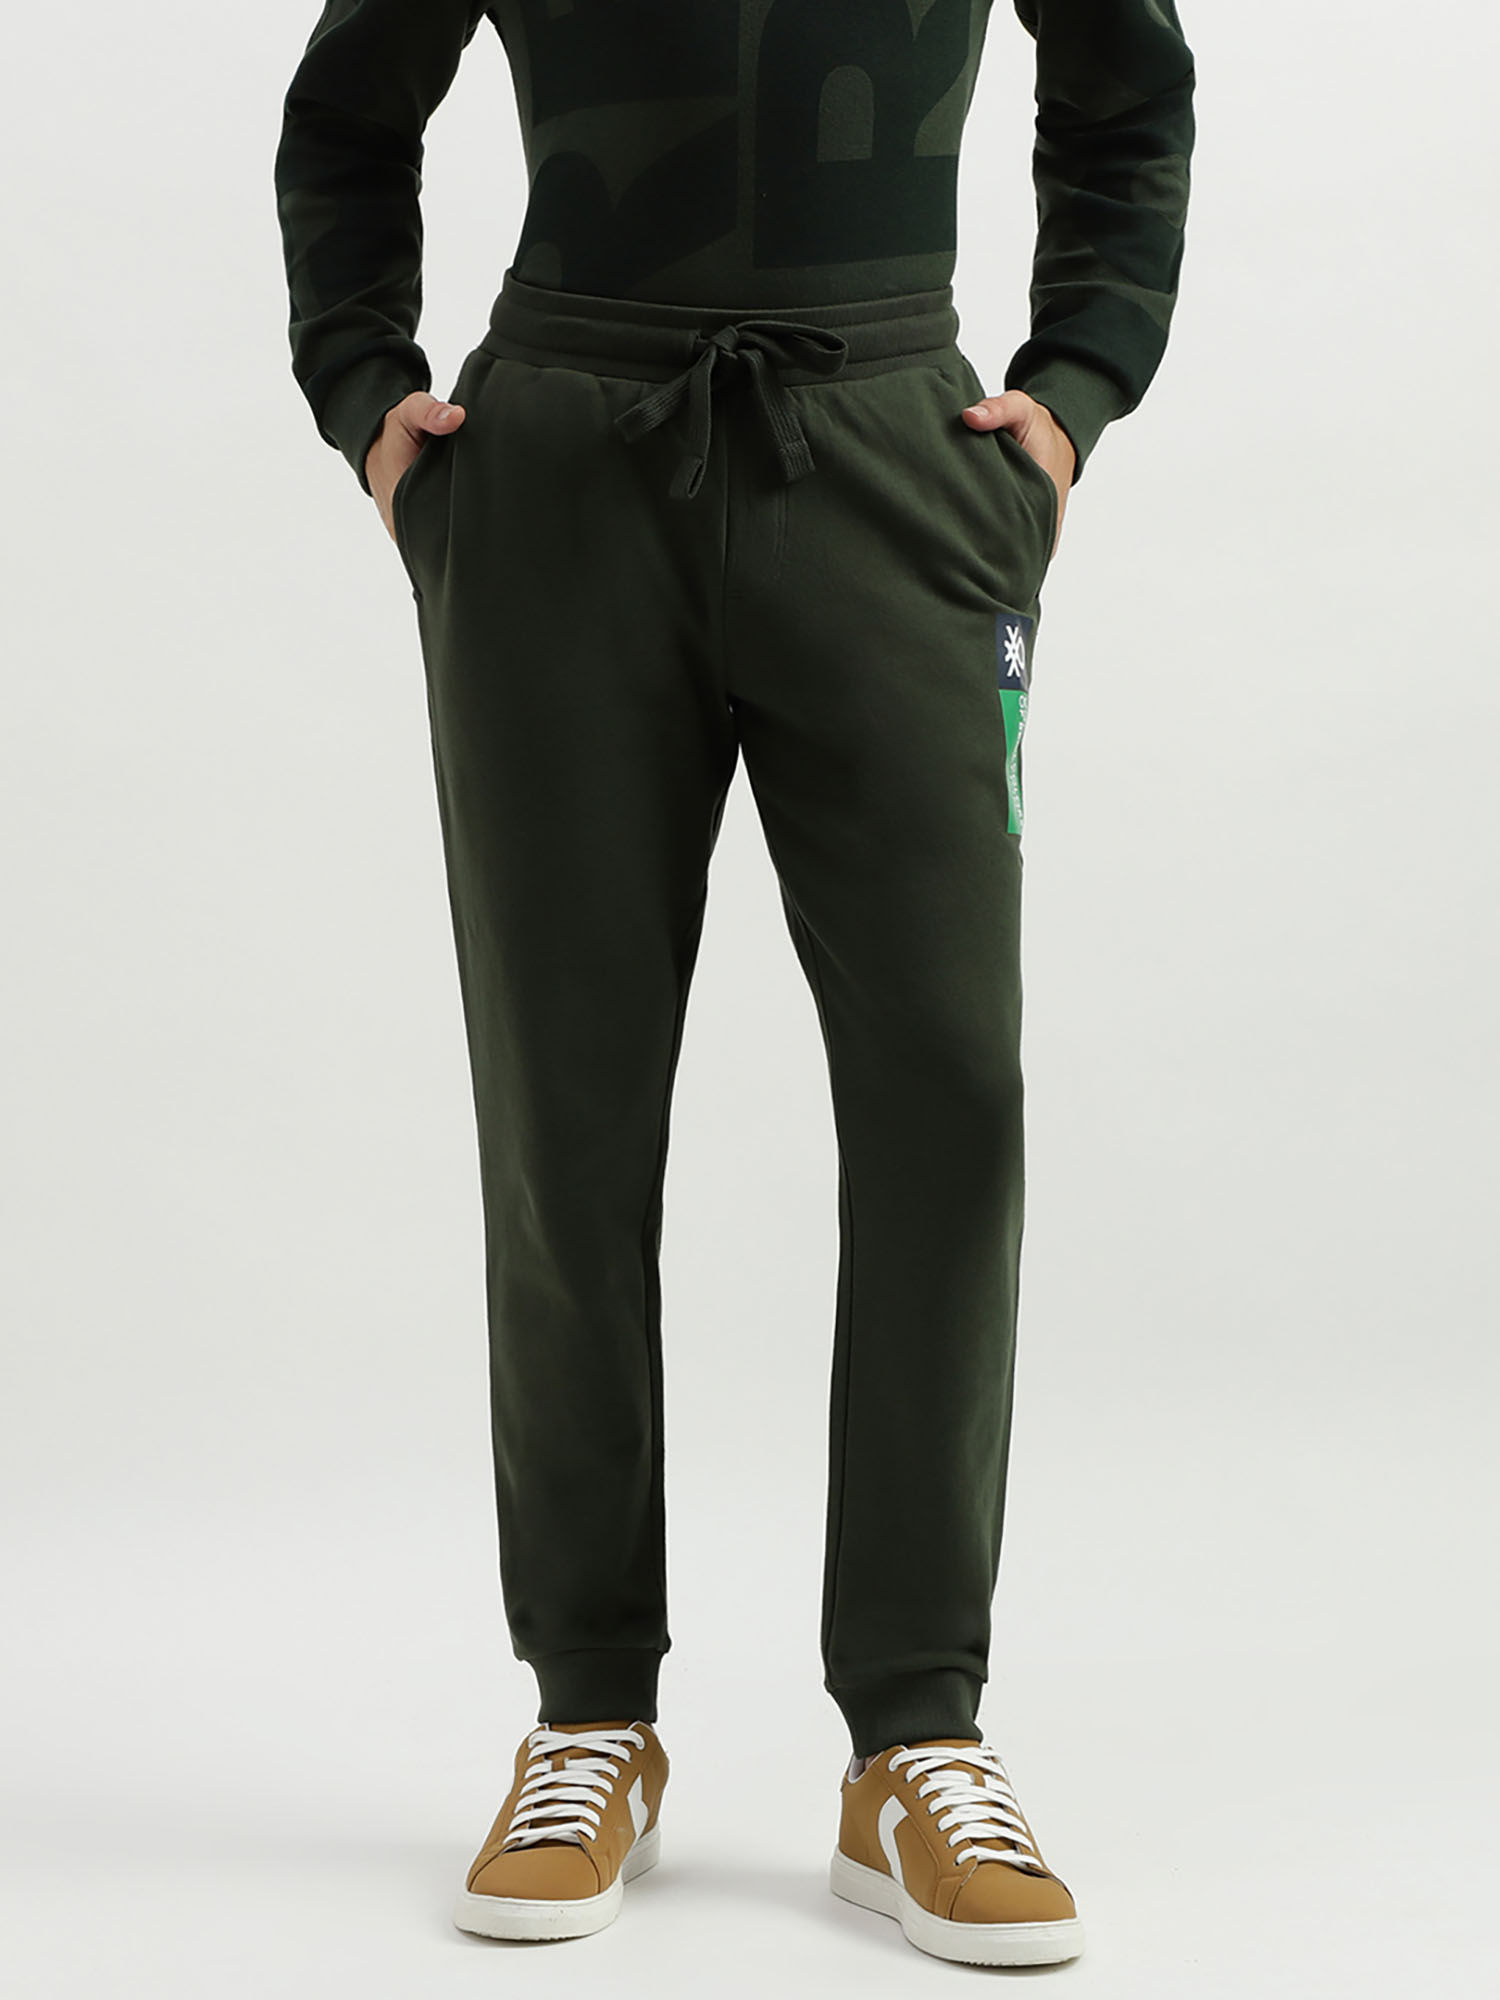 Buy Black Track Pants for Men by UNITED COLORS OF BENETTON Online | Ajio.com